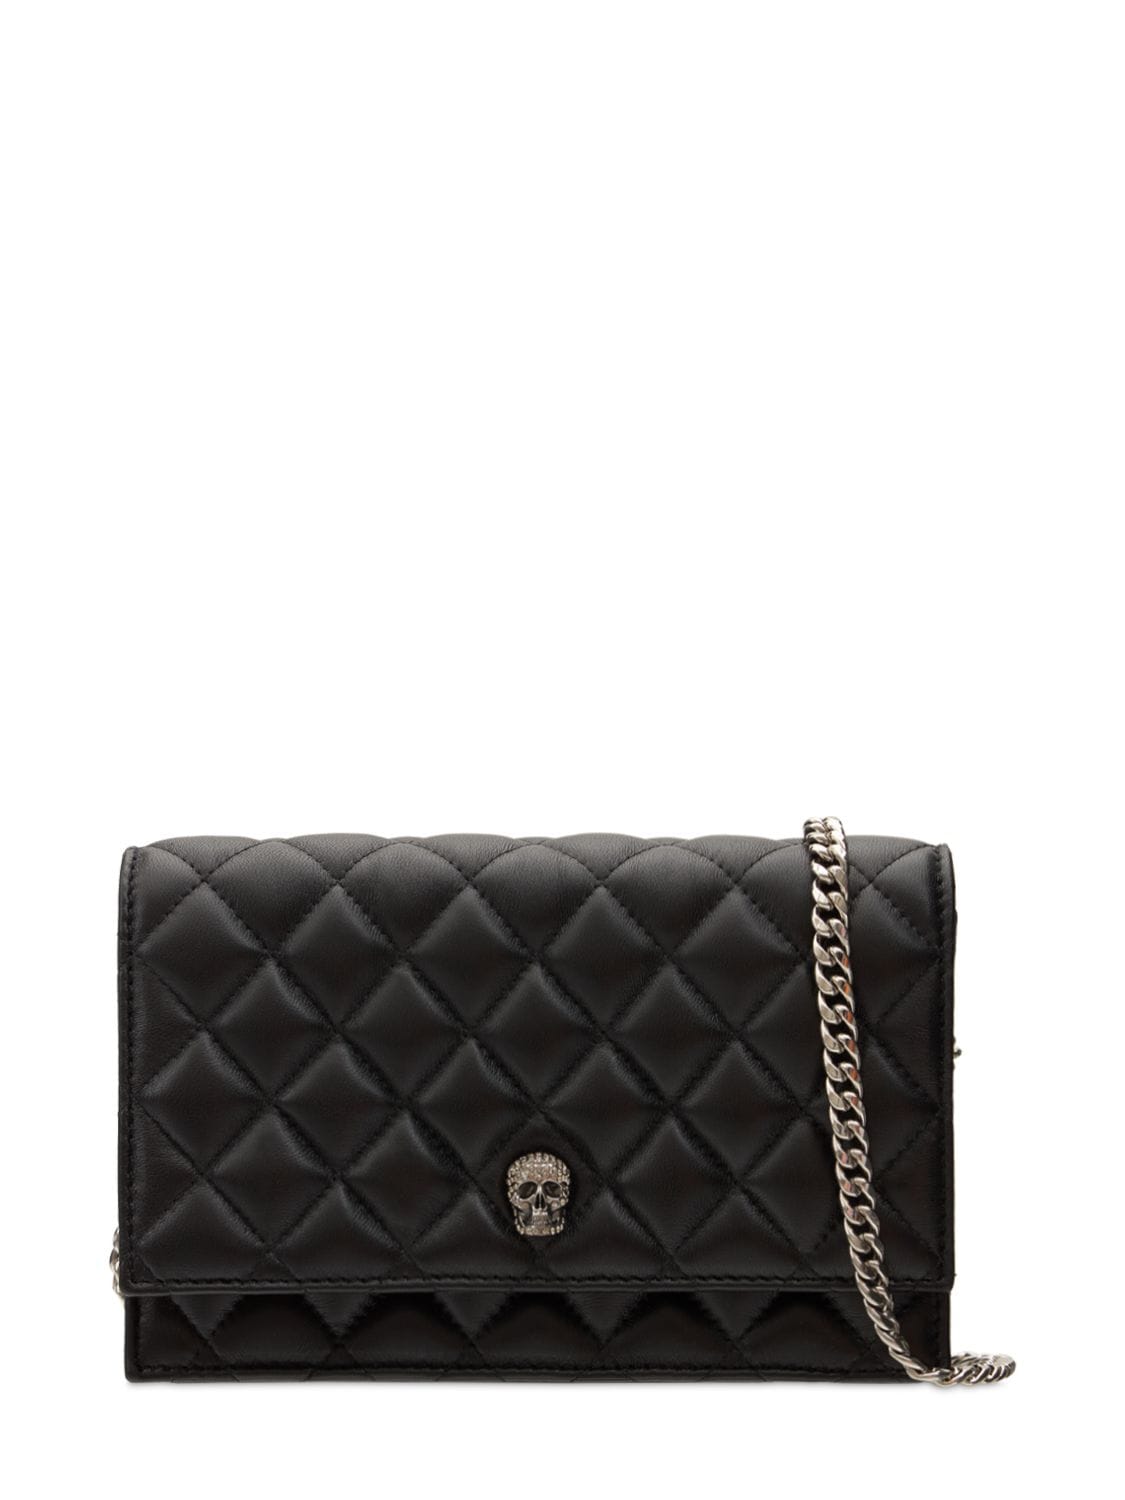 ALEXANDER MCQUEEN SMALL QUILTED PAVE SKULL SHOULDER BAG,74IA8E036-MTAWMA2